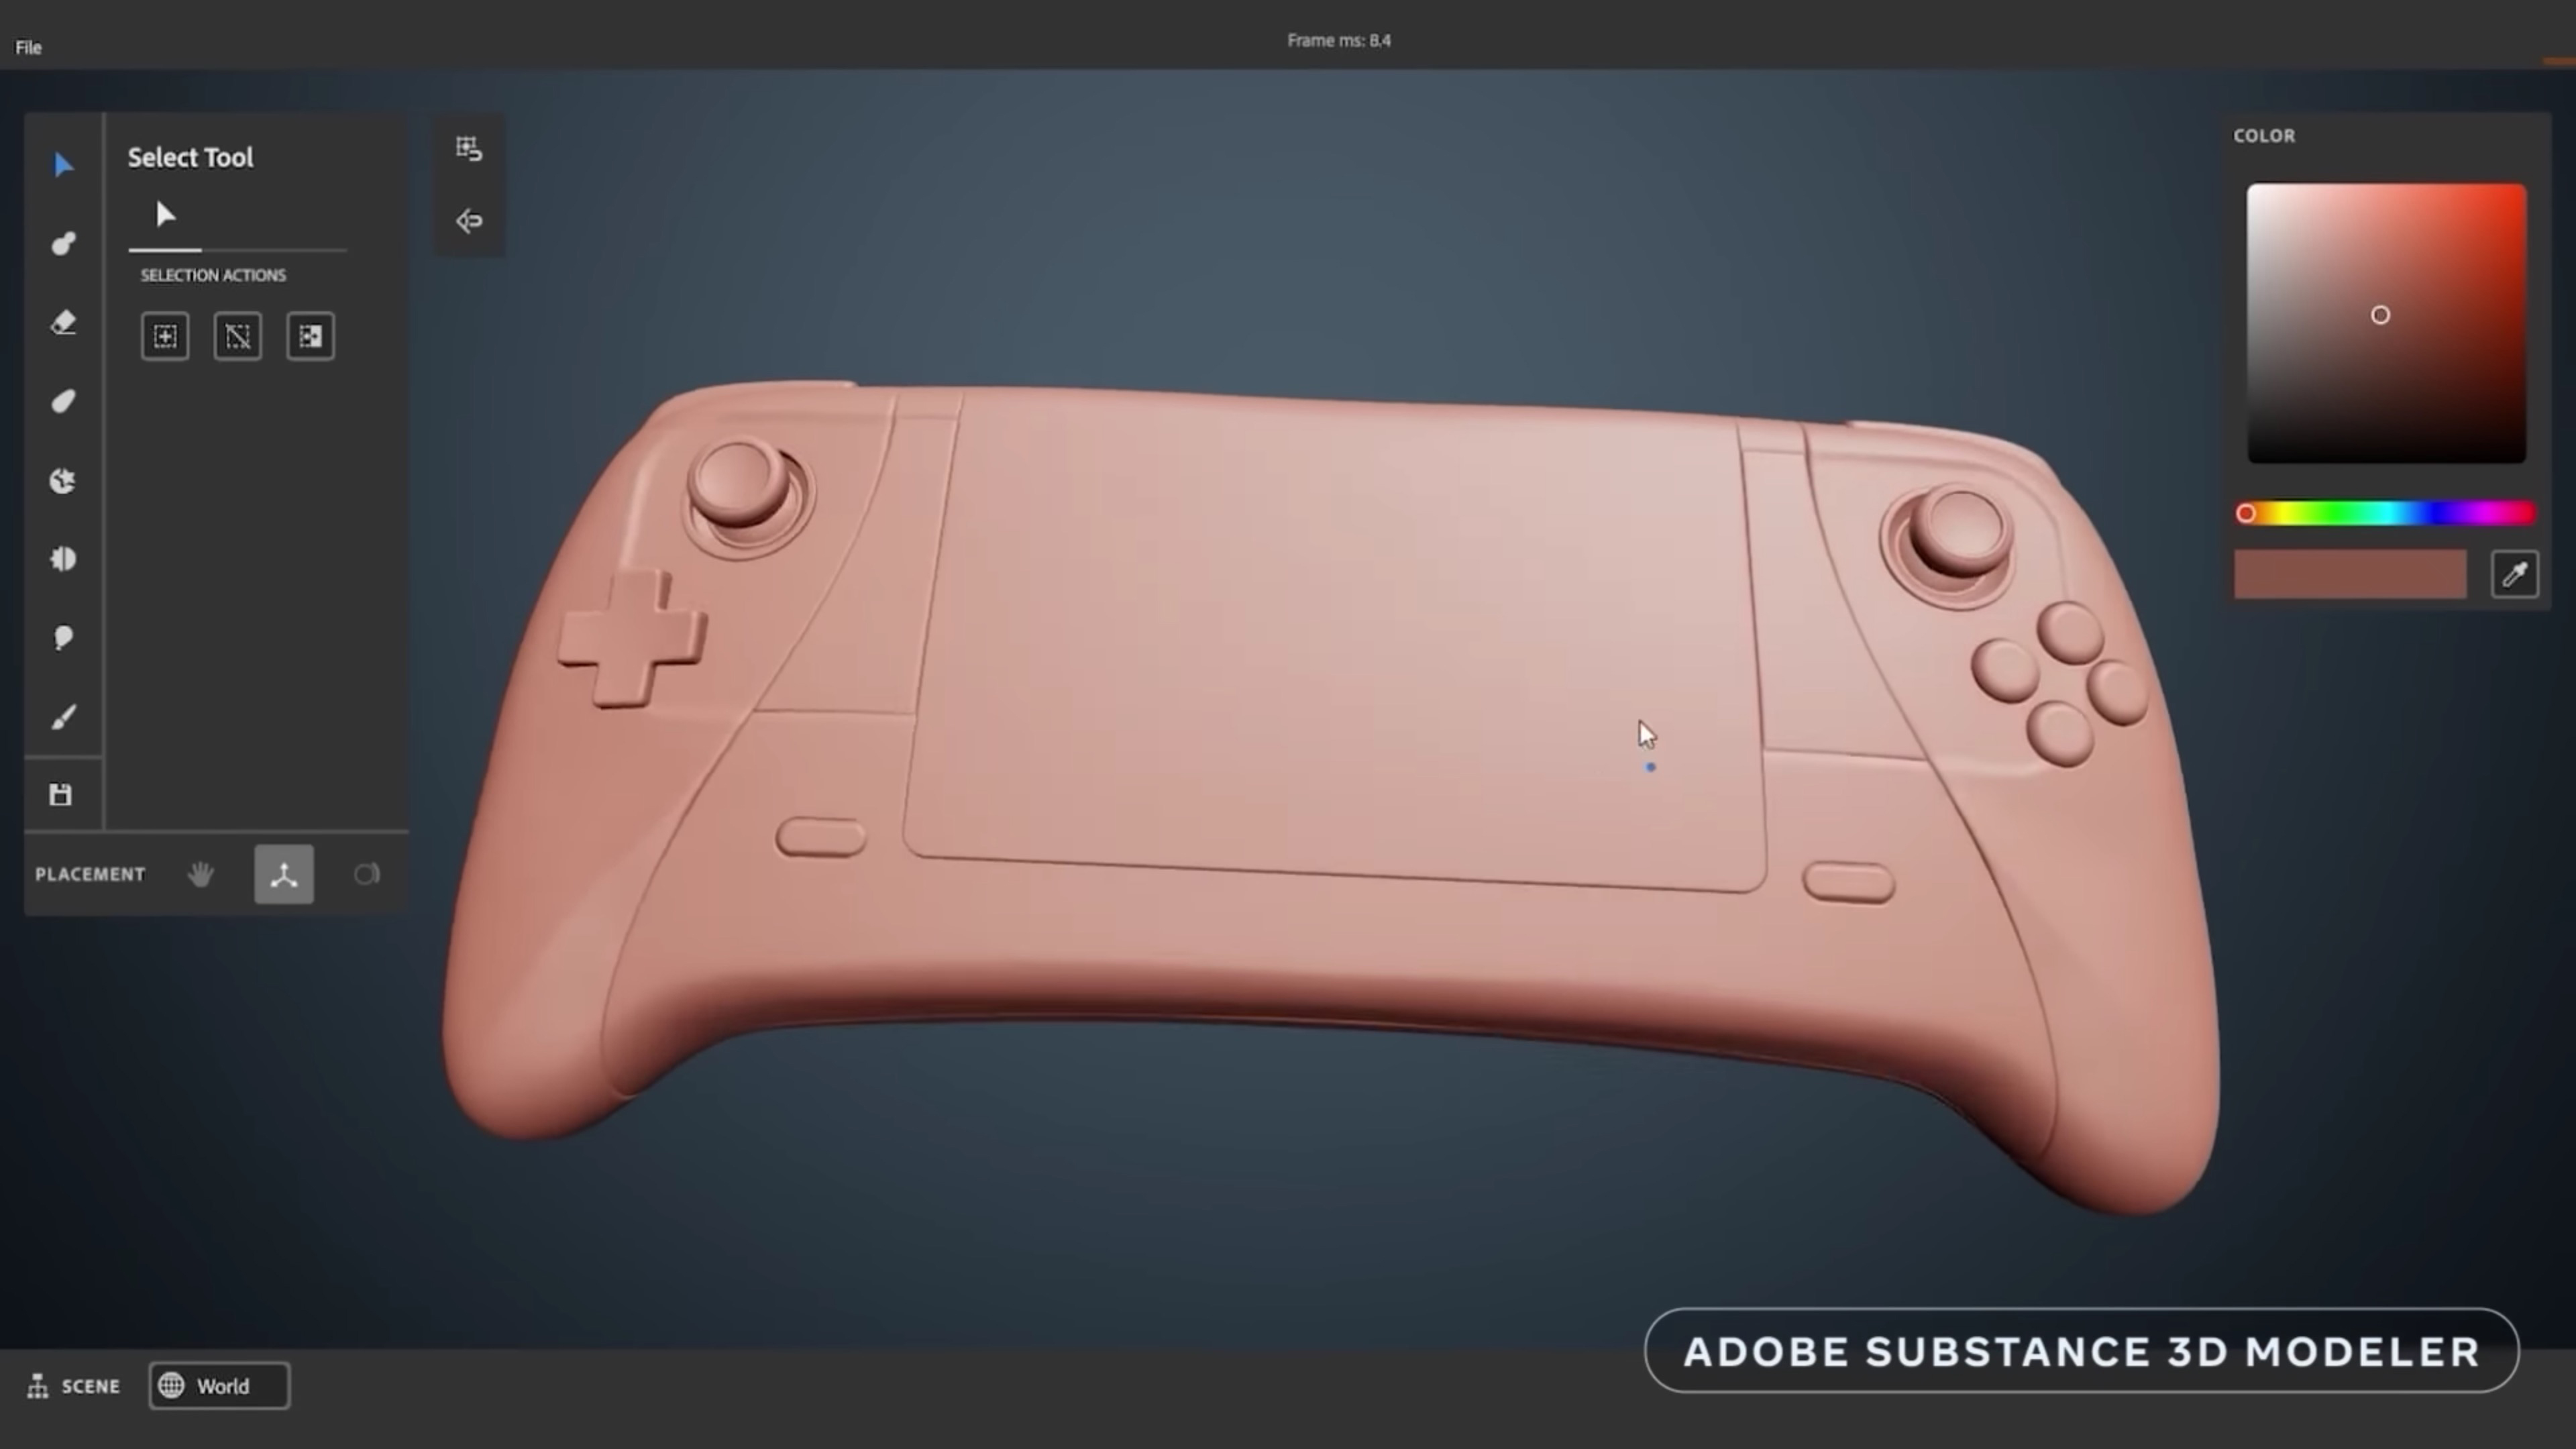 A virtual gamepad in Adobe's 3D modeling software